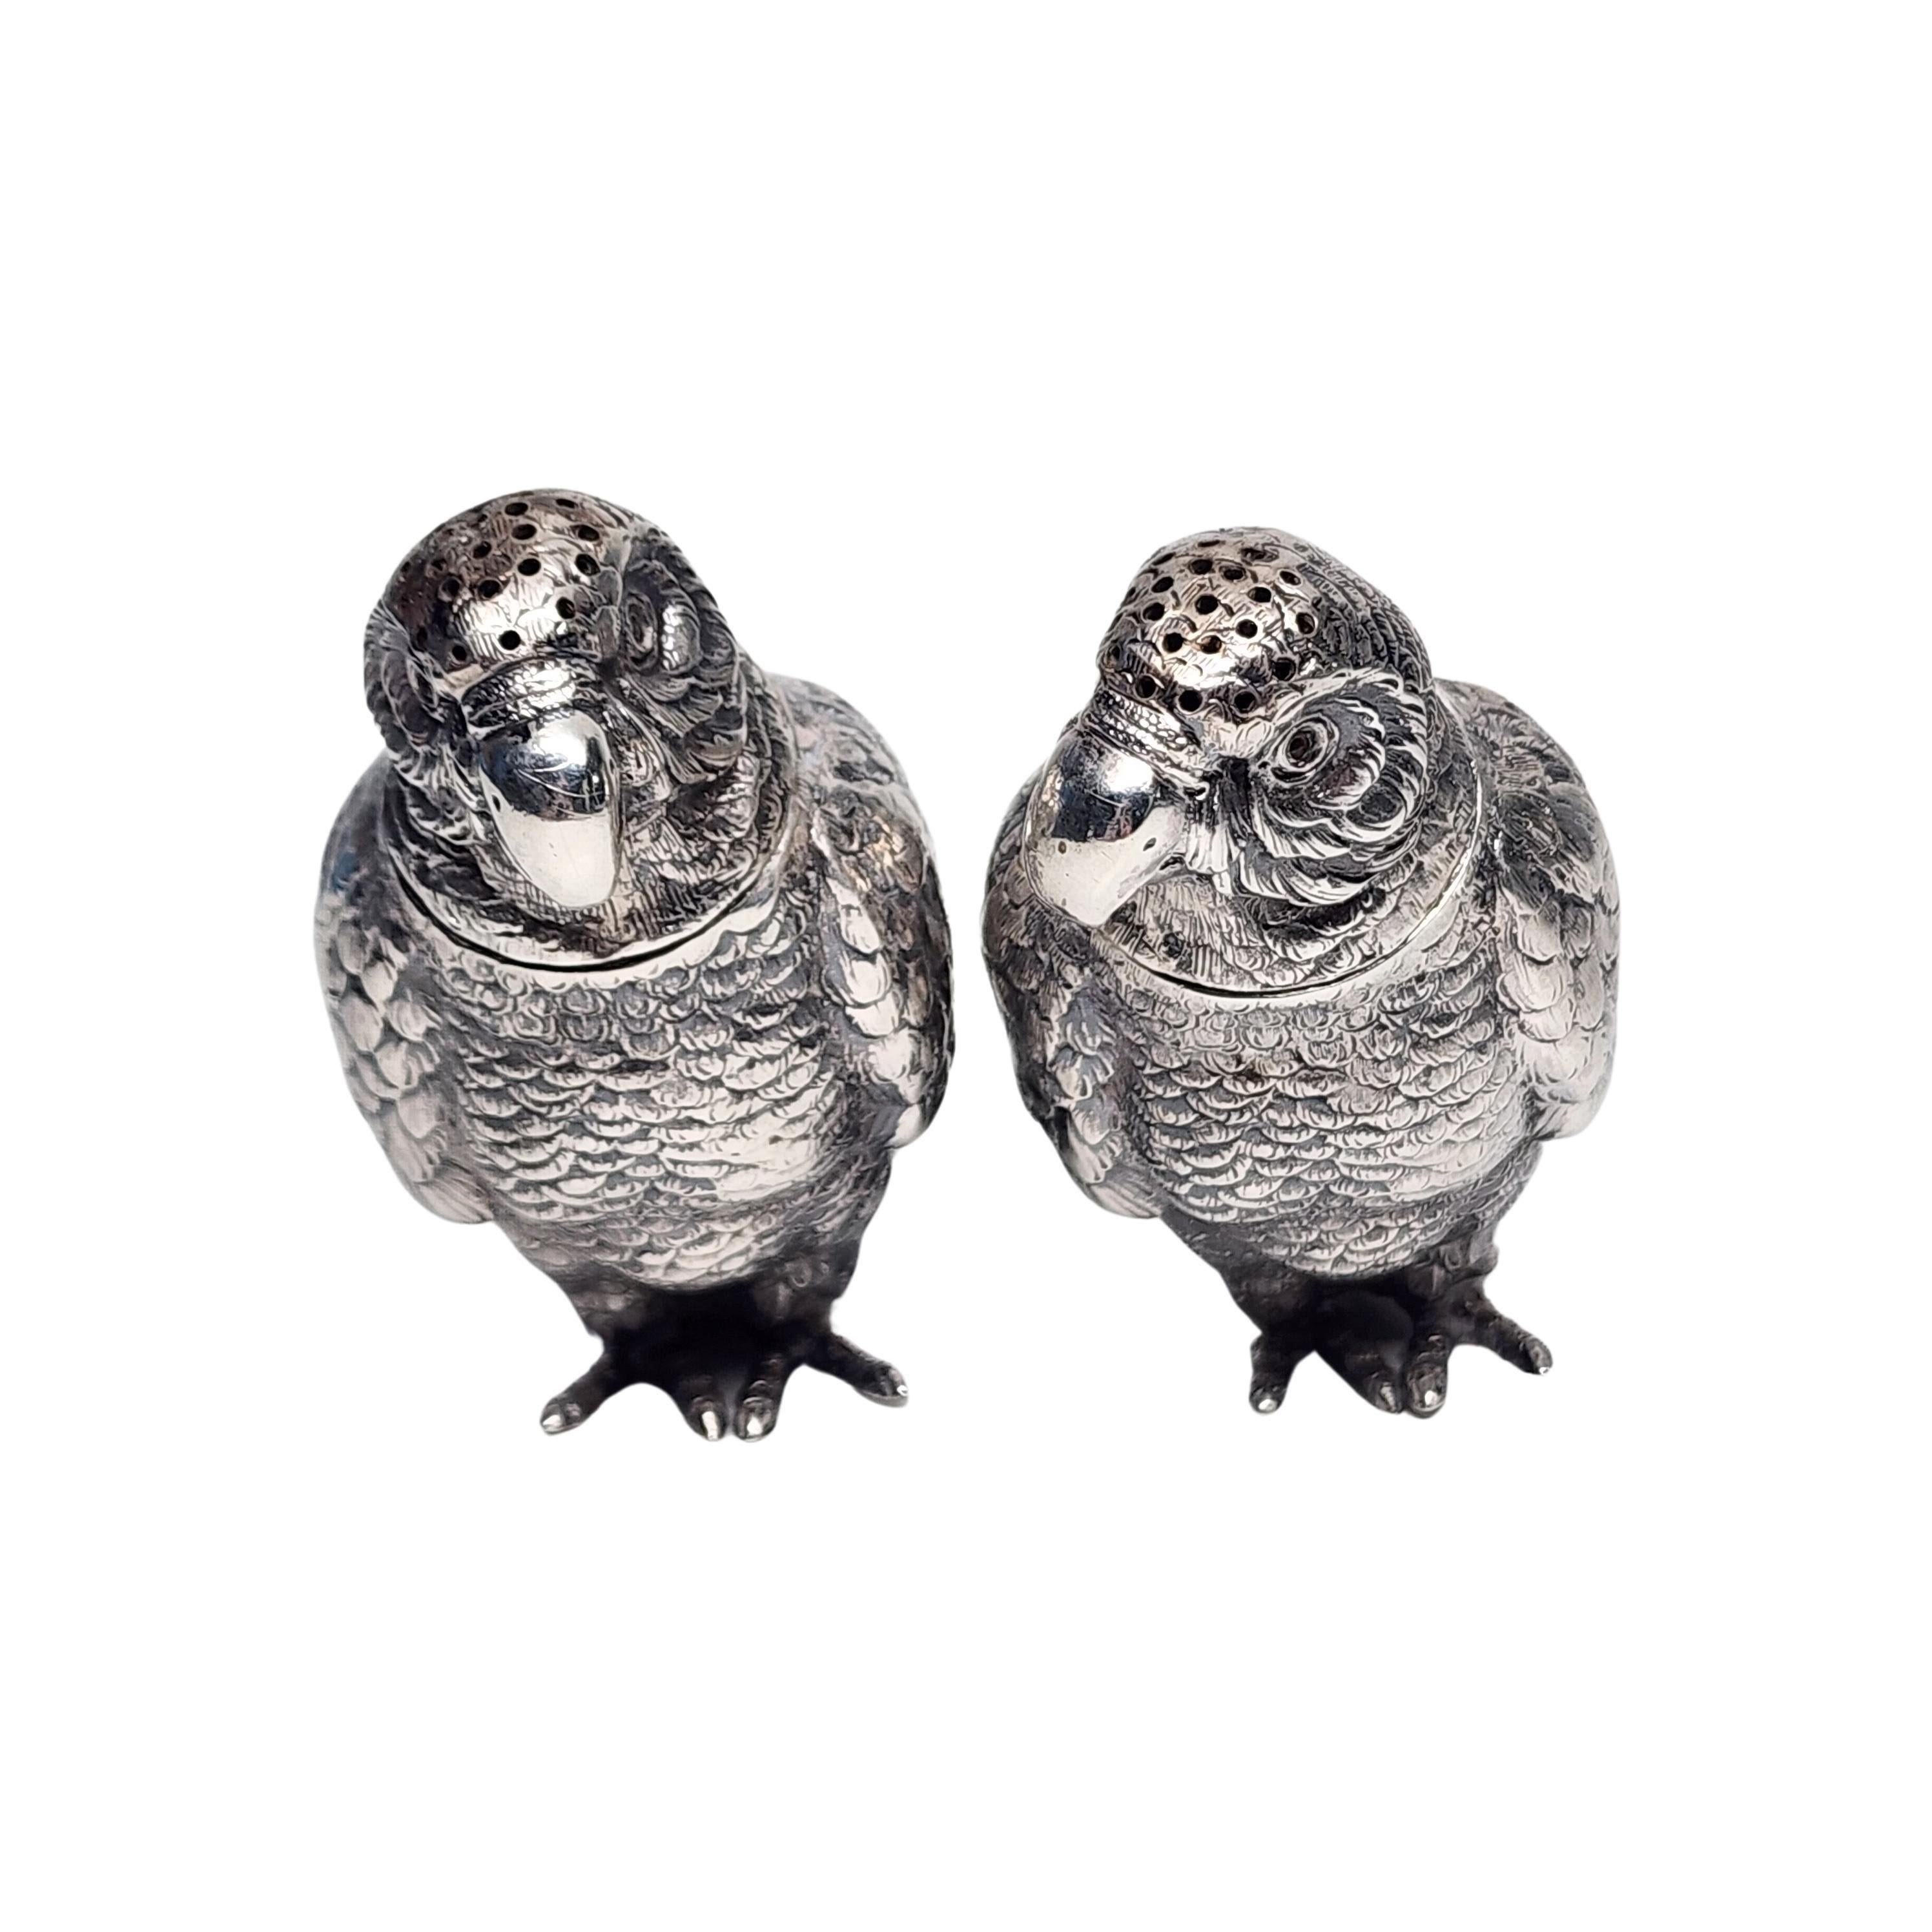 Vintage 935 sterling silver parrot salt and pepper shakers by Berthold Muller.

A pair of highly detailed parrot salt and pepper shakers by the renowned Berthold Muller. Each head twists off to fill, with notch and tab closures.

Measures approx 2